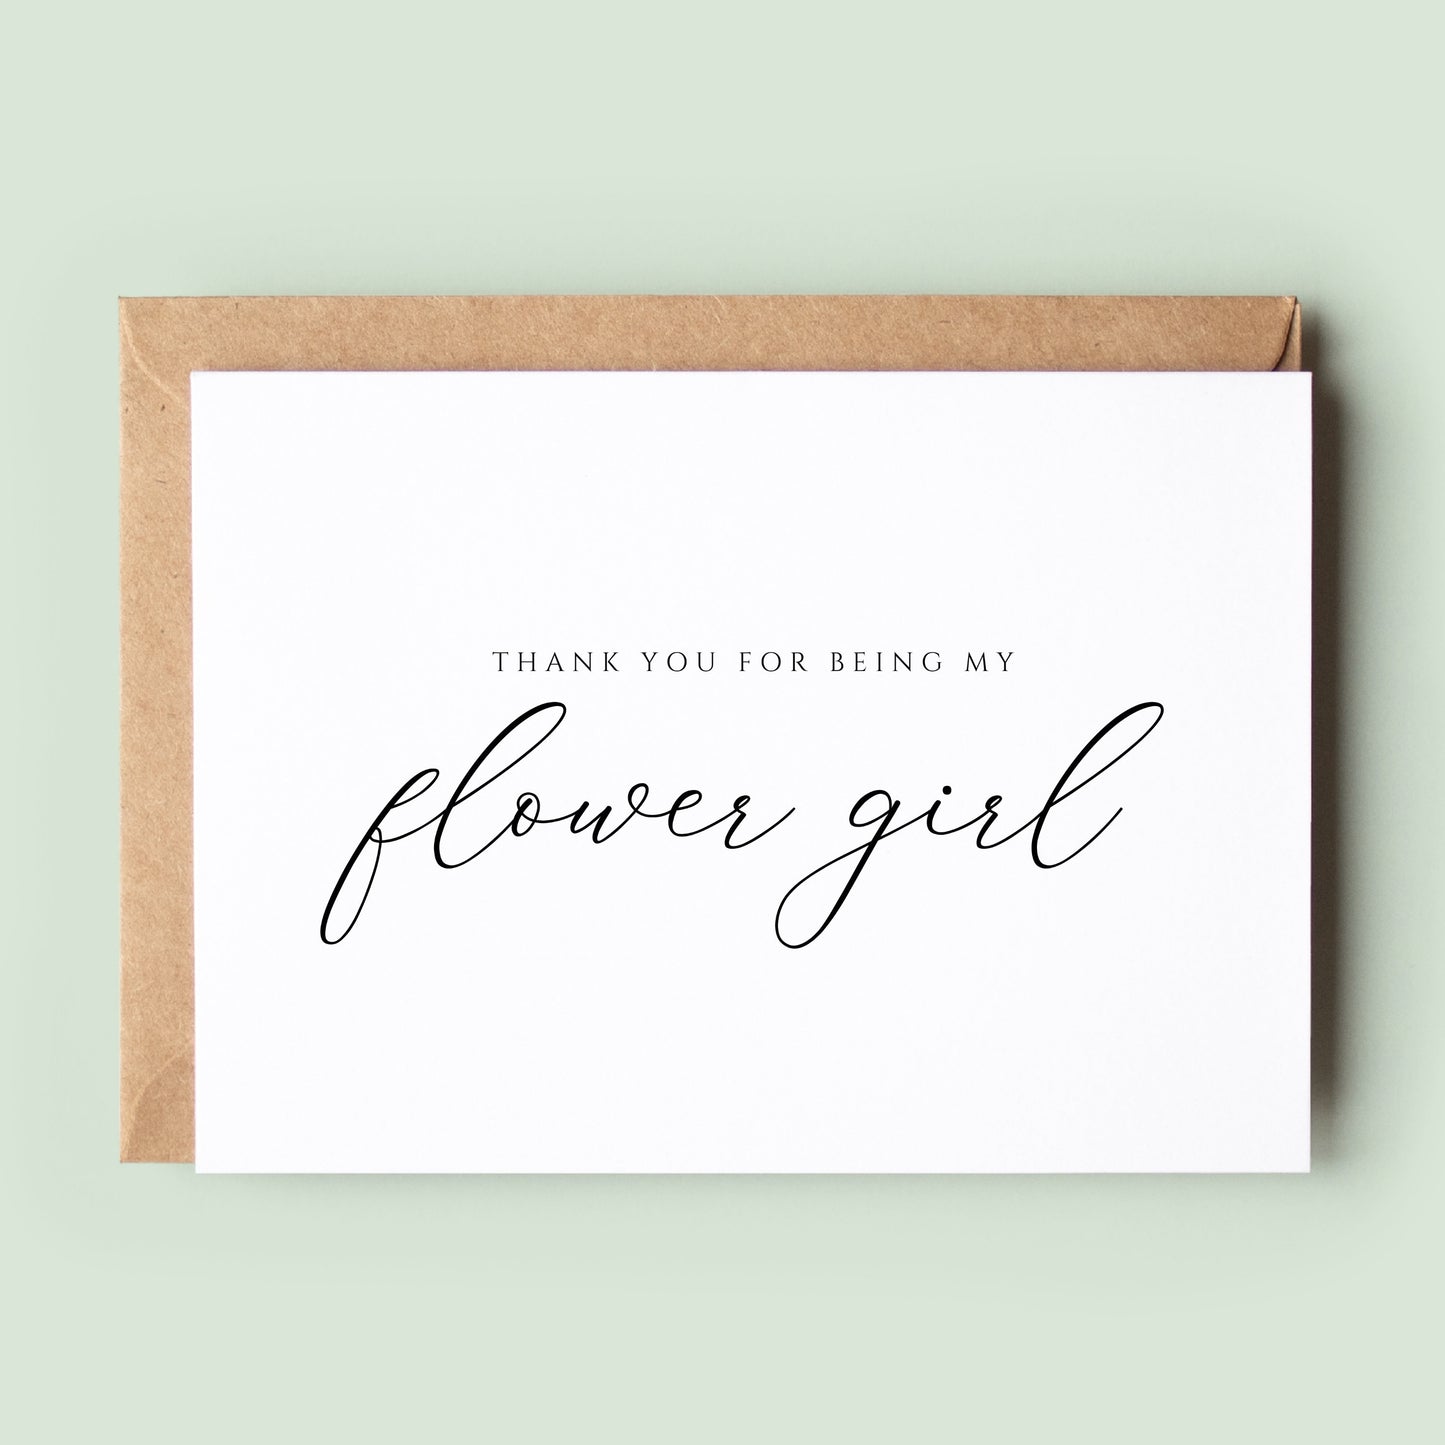 Classic Thank You Maid of Honor Card, Maid of Honor Wedding Thank You Card, Card To Maid of Honor, Maid of Honor Thanks, Wedding Party Card